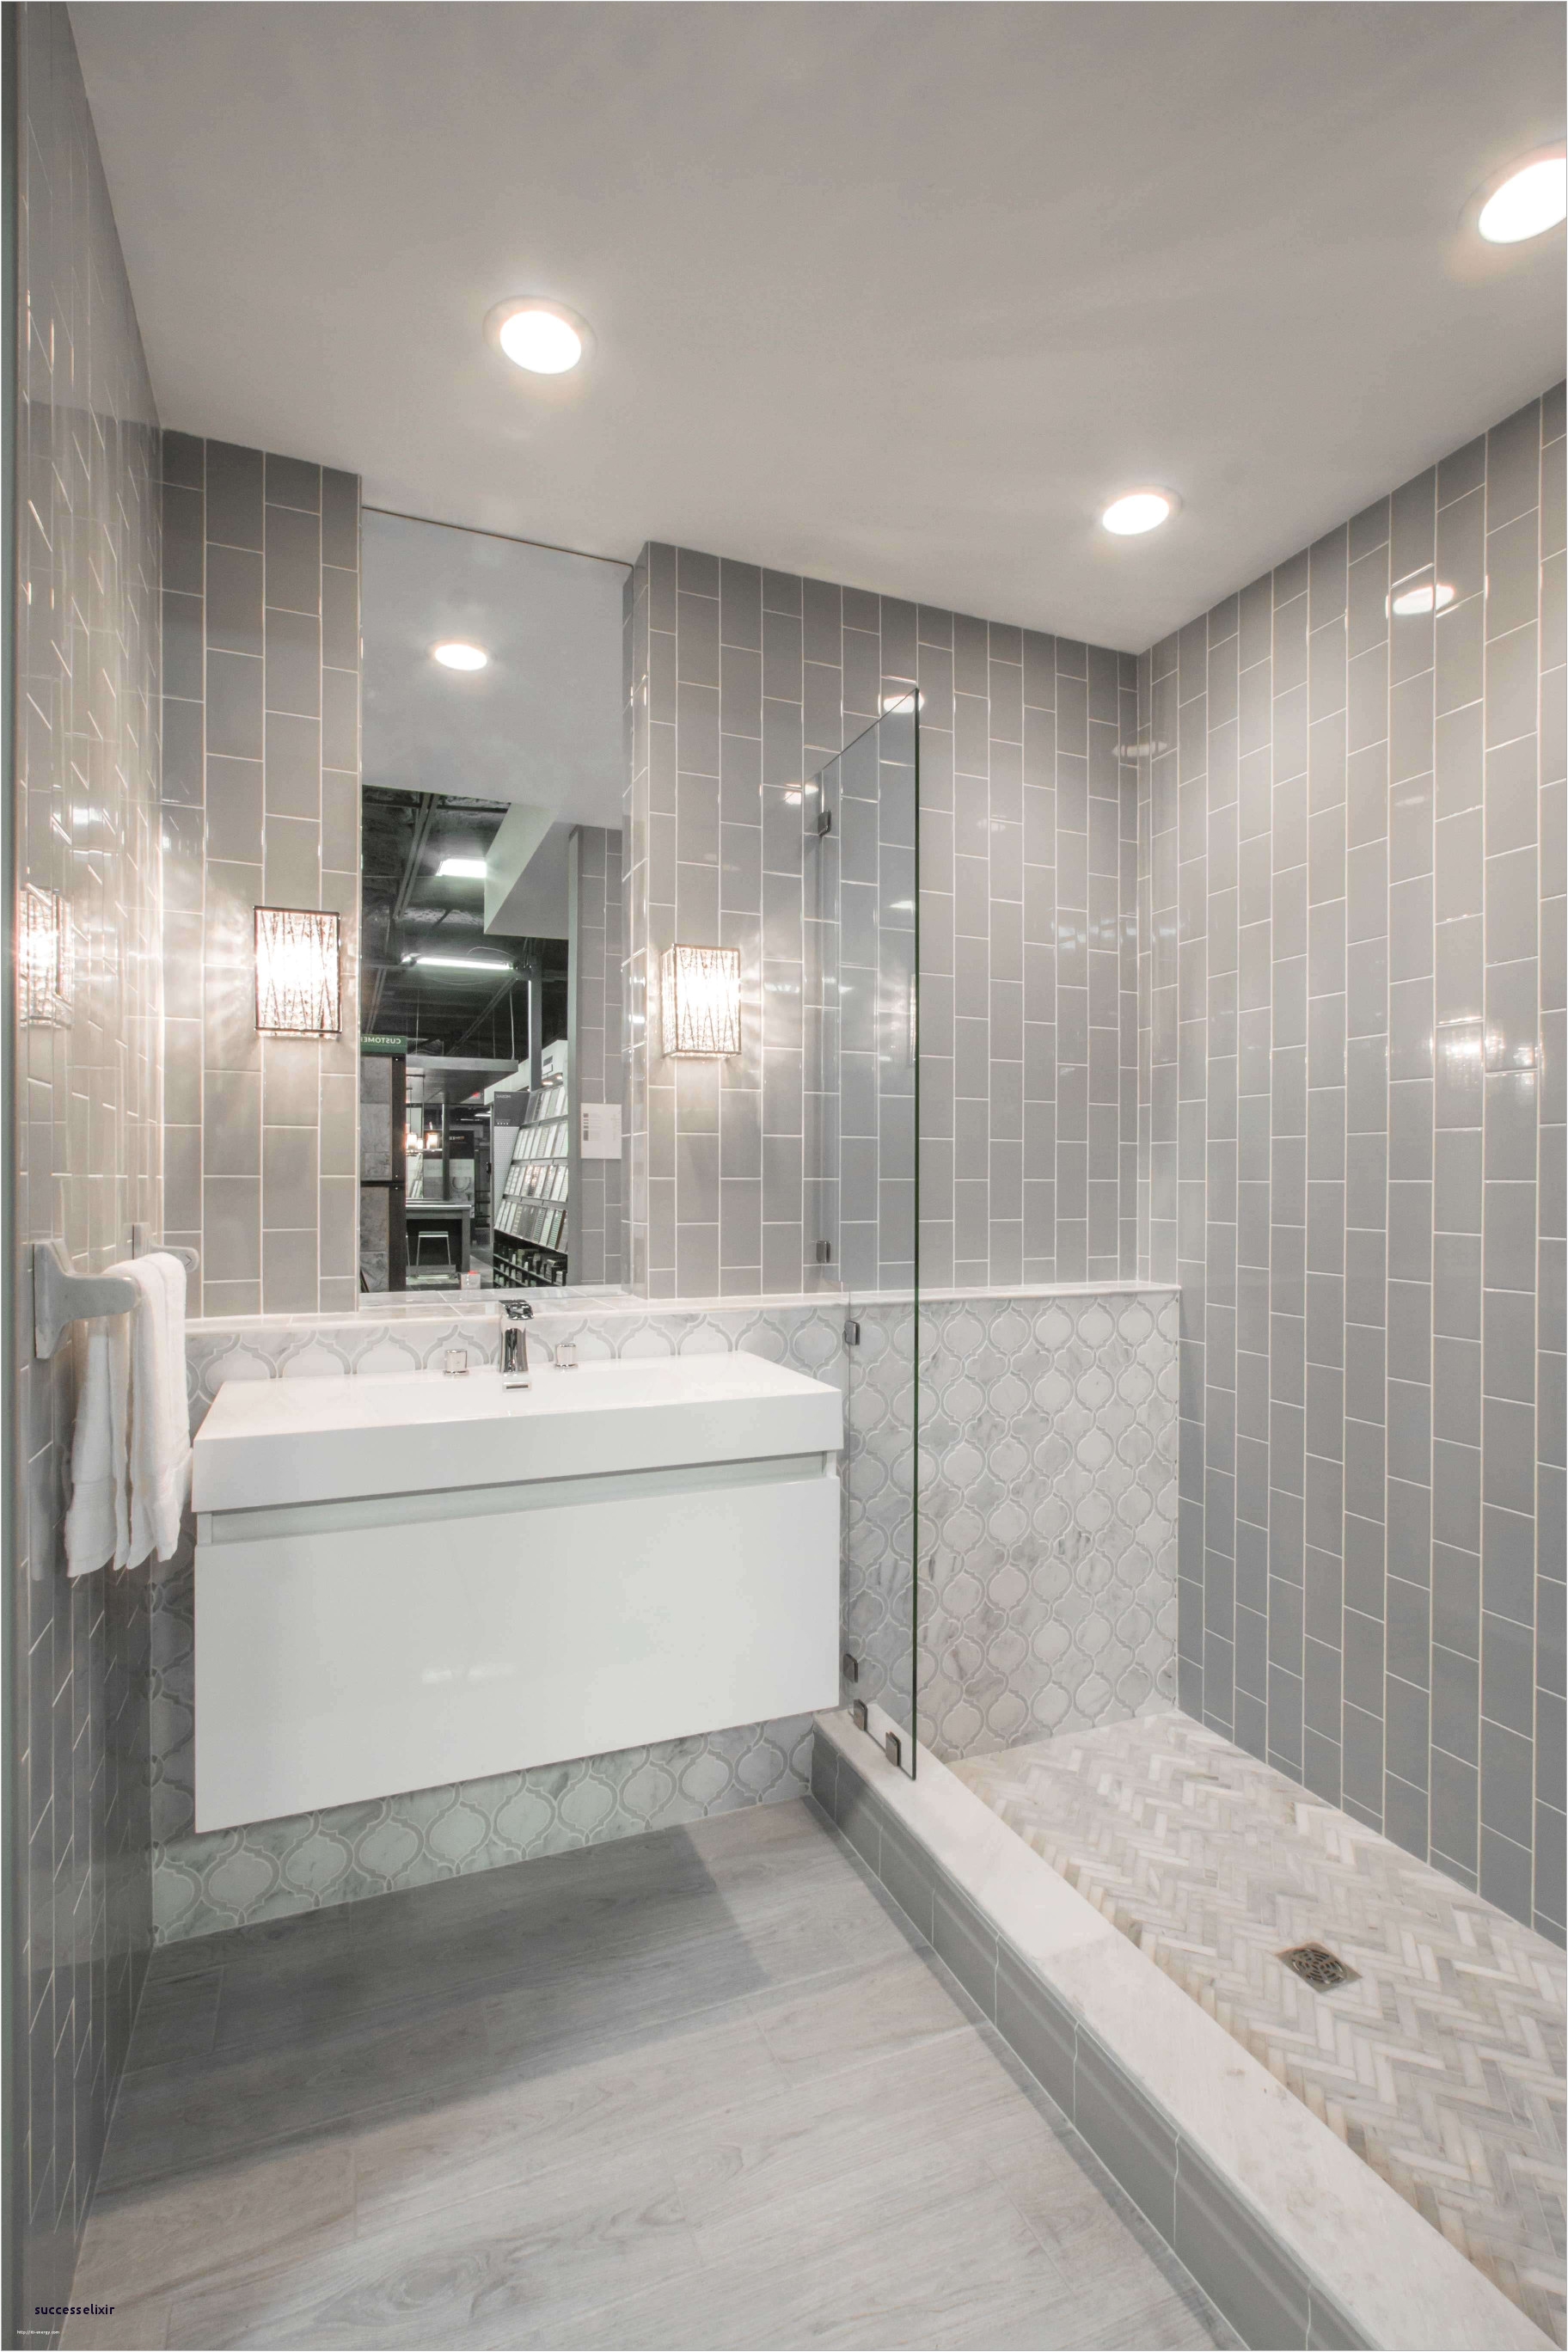 Top 5 Bathroom Remodel before and after Cost